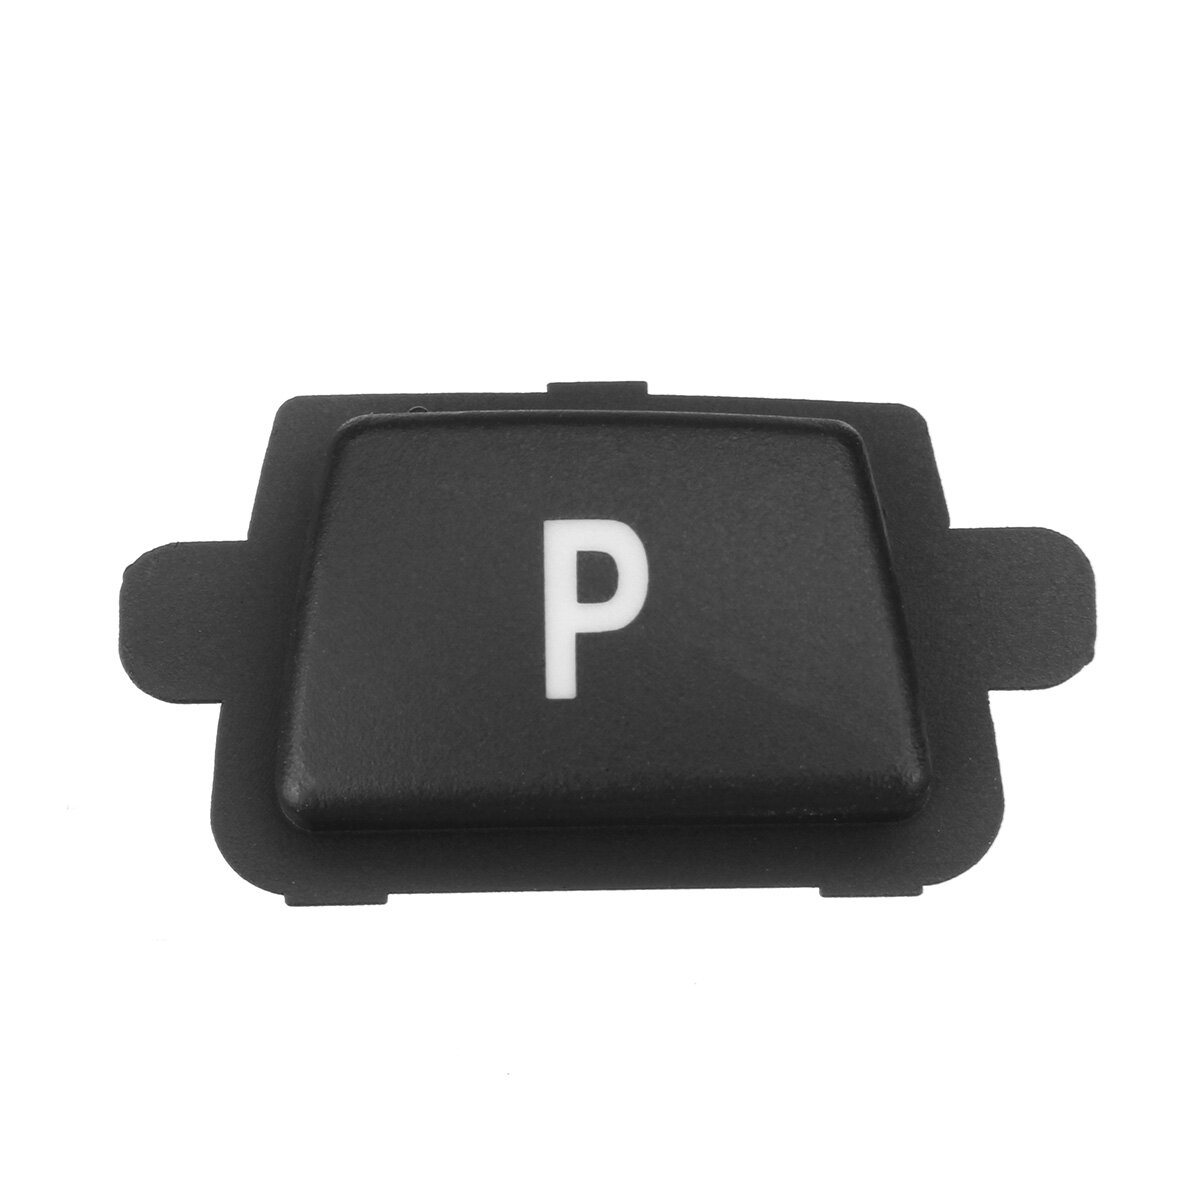 Electronic E Gear Shift P Parking Button Cover Replacement Part For BMW 3 5 7 Series X3 X4 X5 X6